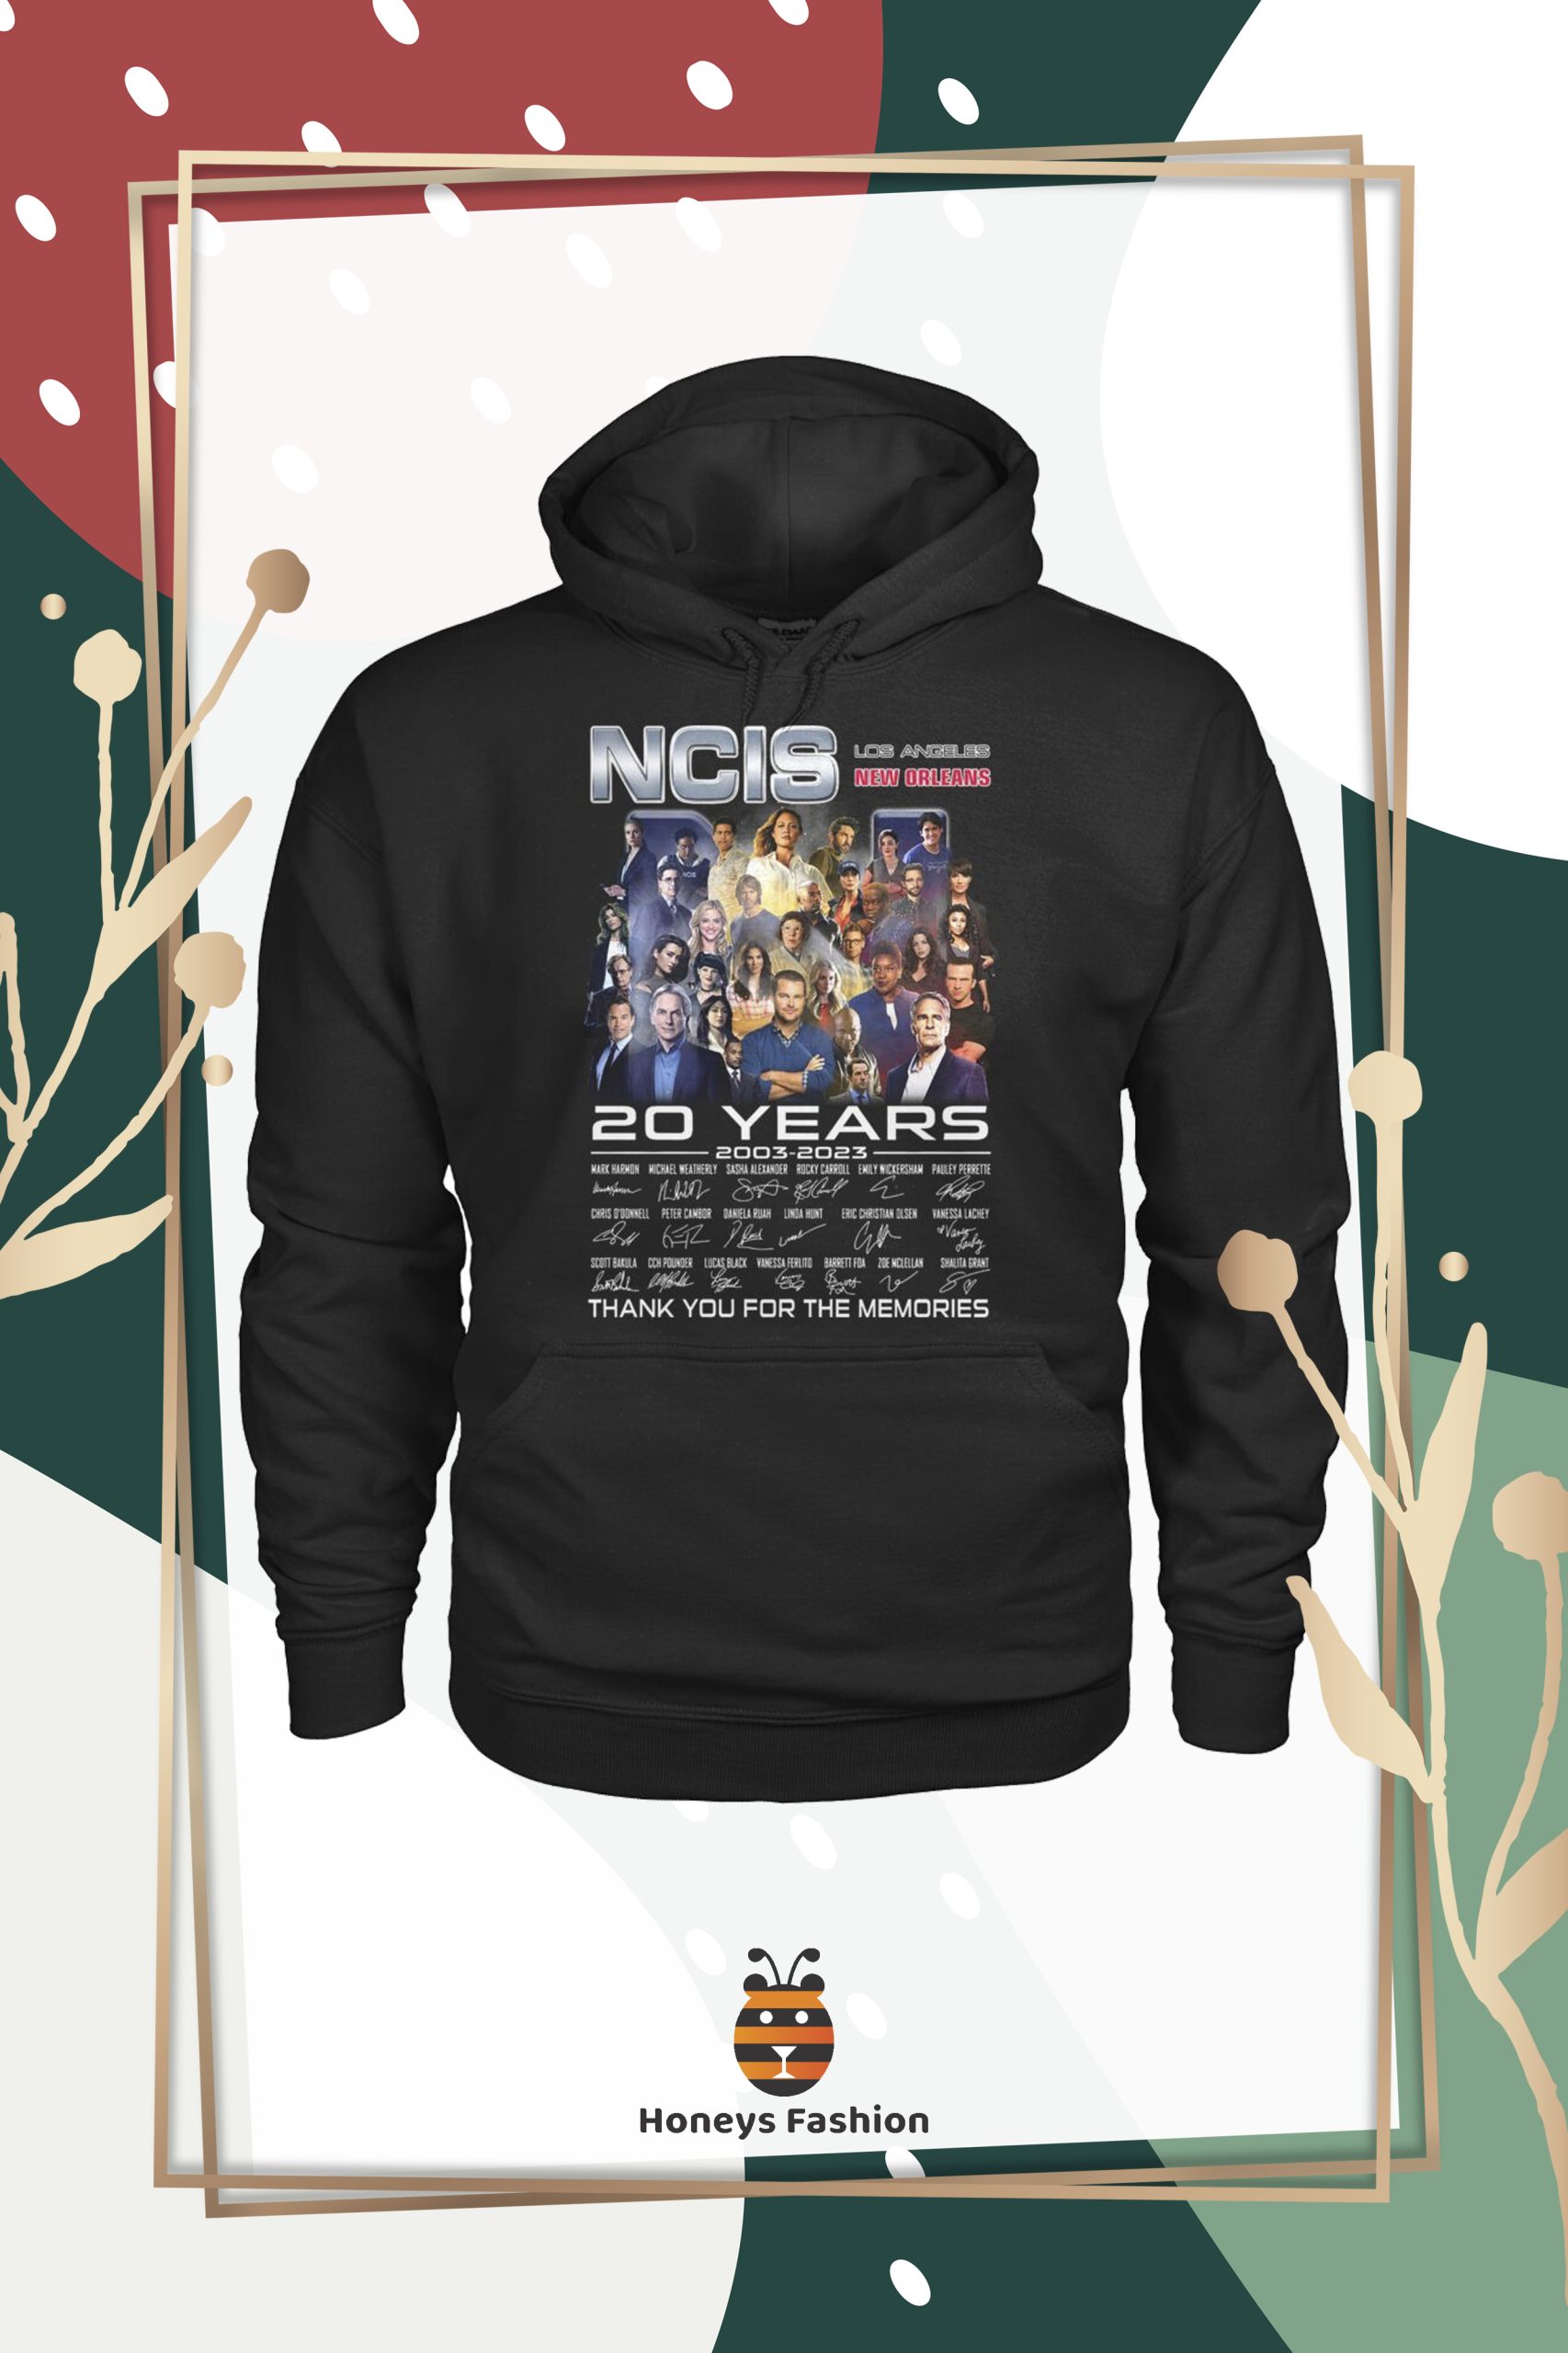 NCIS Los Angeles New Orleans 20 Years Thank You For The Memories Shirt Hoodie